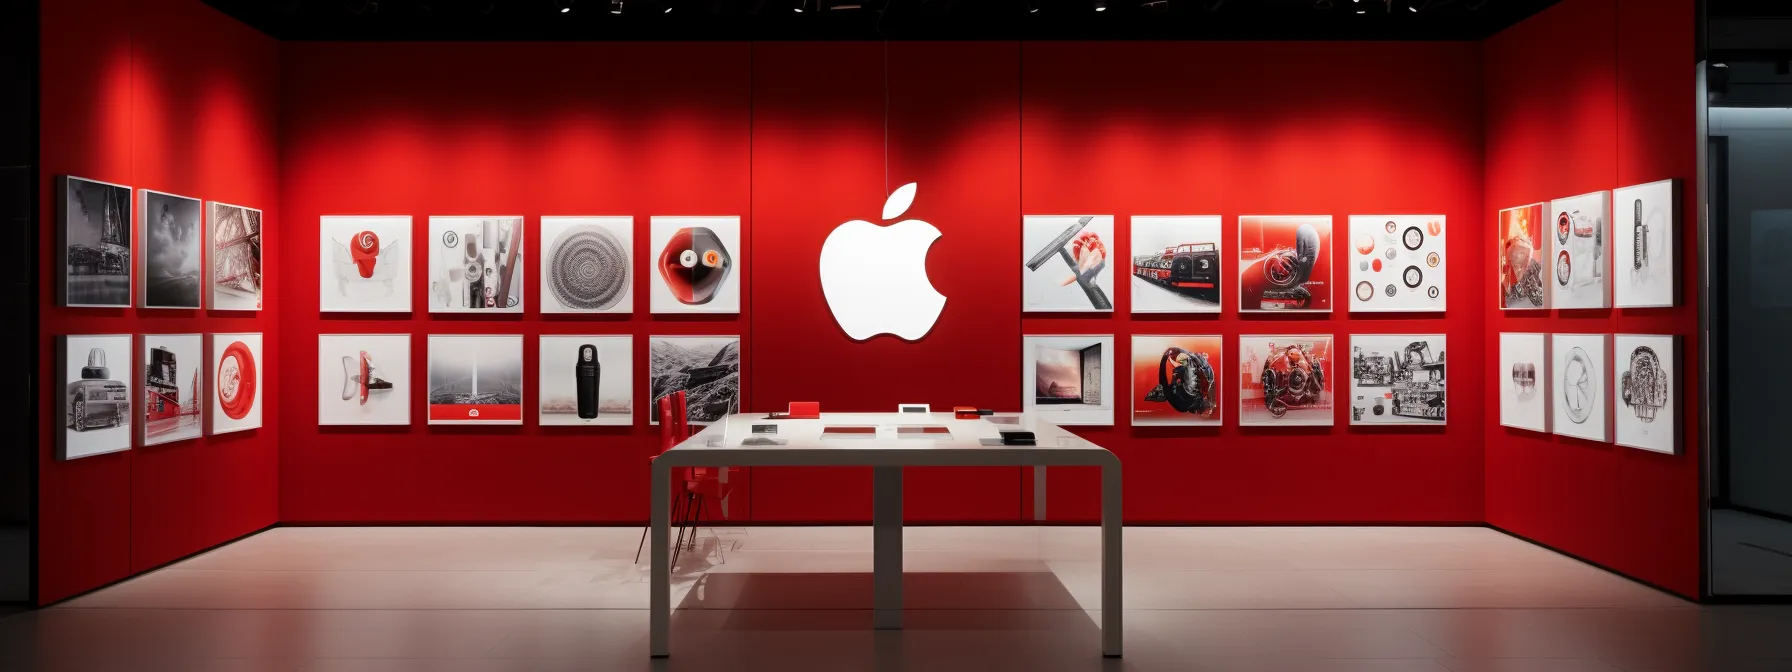 A Gallery Showcasing Masterpieces Of Corporate Branding Strategies With The Apple Logo, The Tesla Brand, And The Netflix Red 'N'.